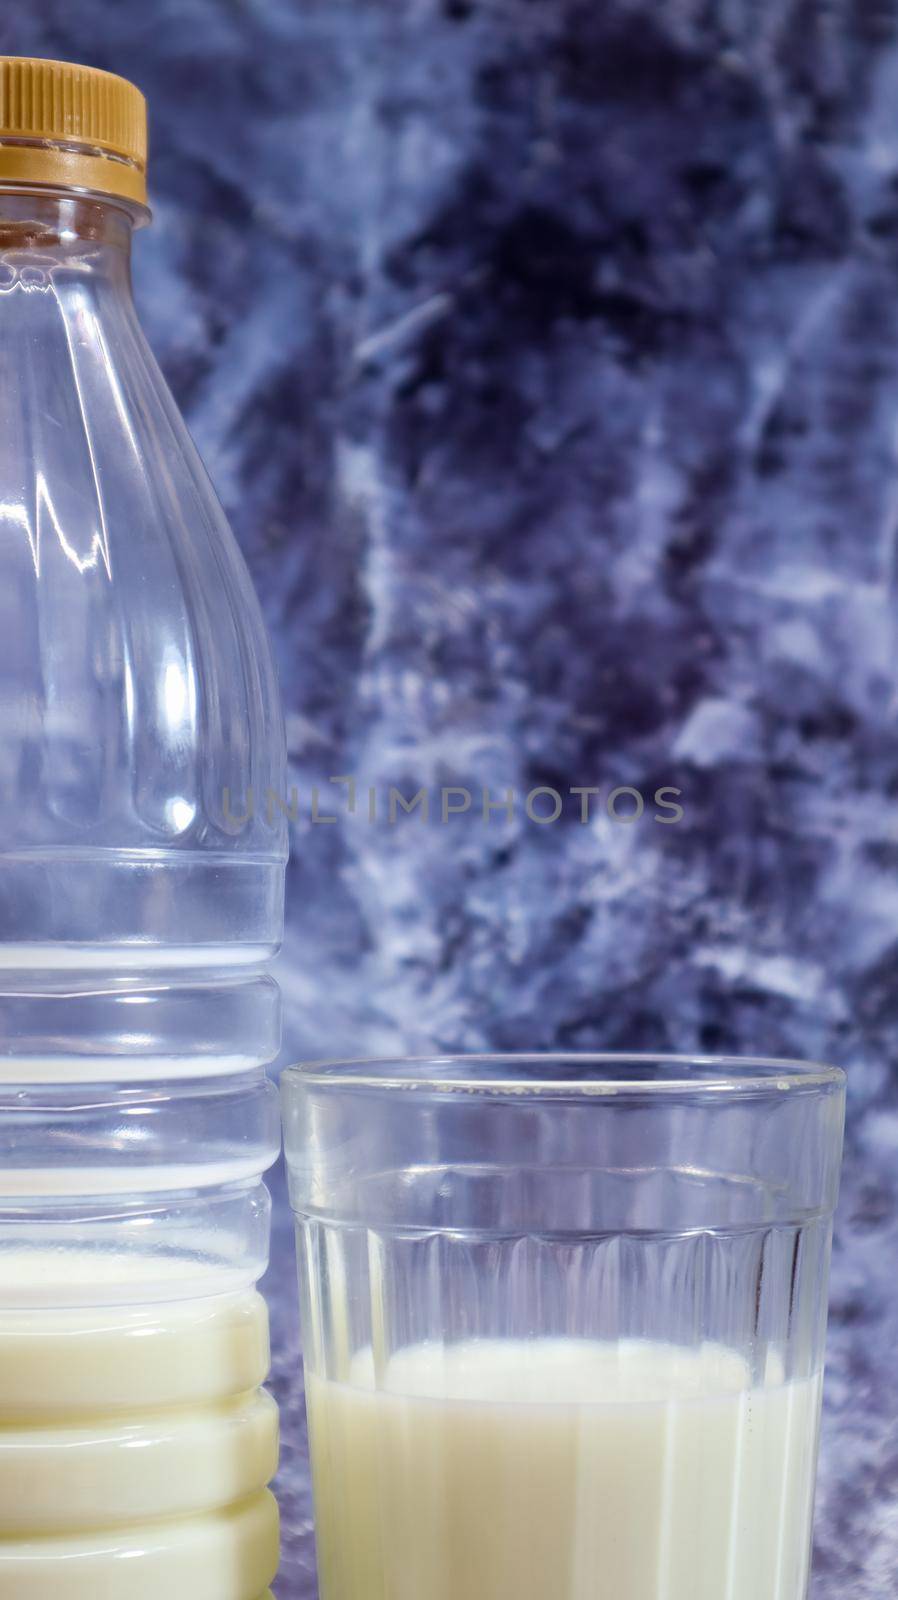 A plastic bottle of fresh regular milk and a glass beaker on a dark gray marbled or concrete background. Close-up front view. World milk day concept. Vertical photography. by Roshchyn